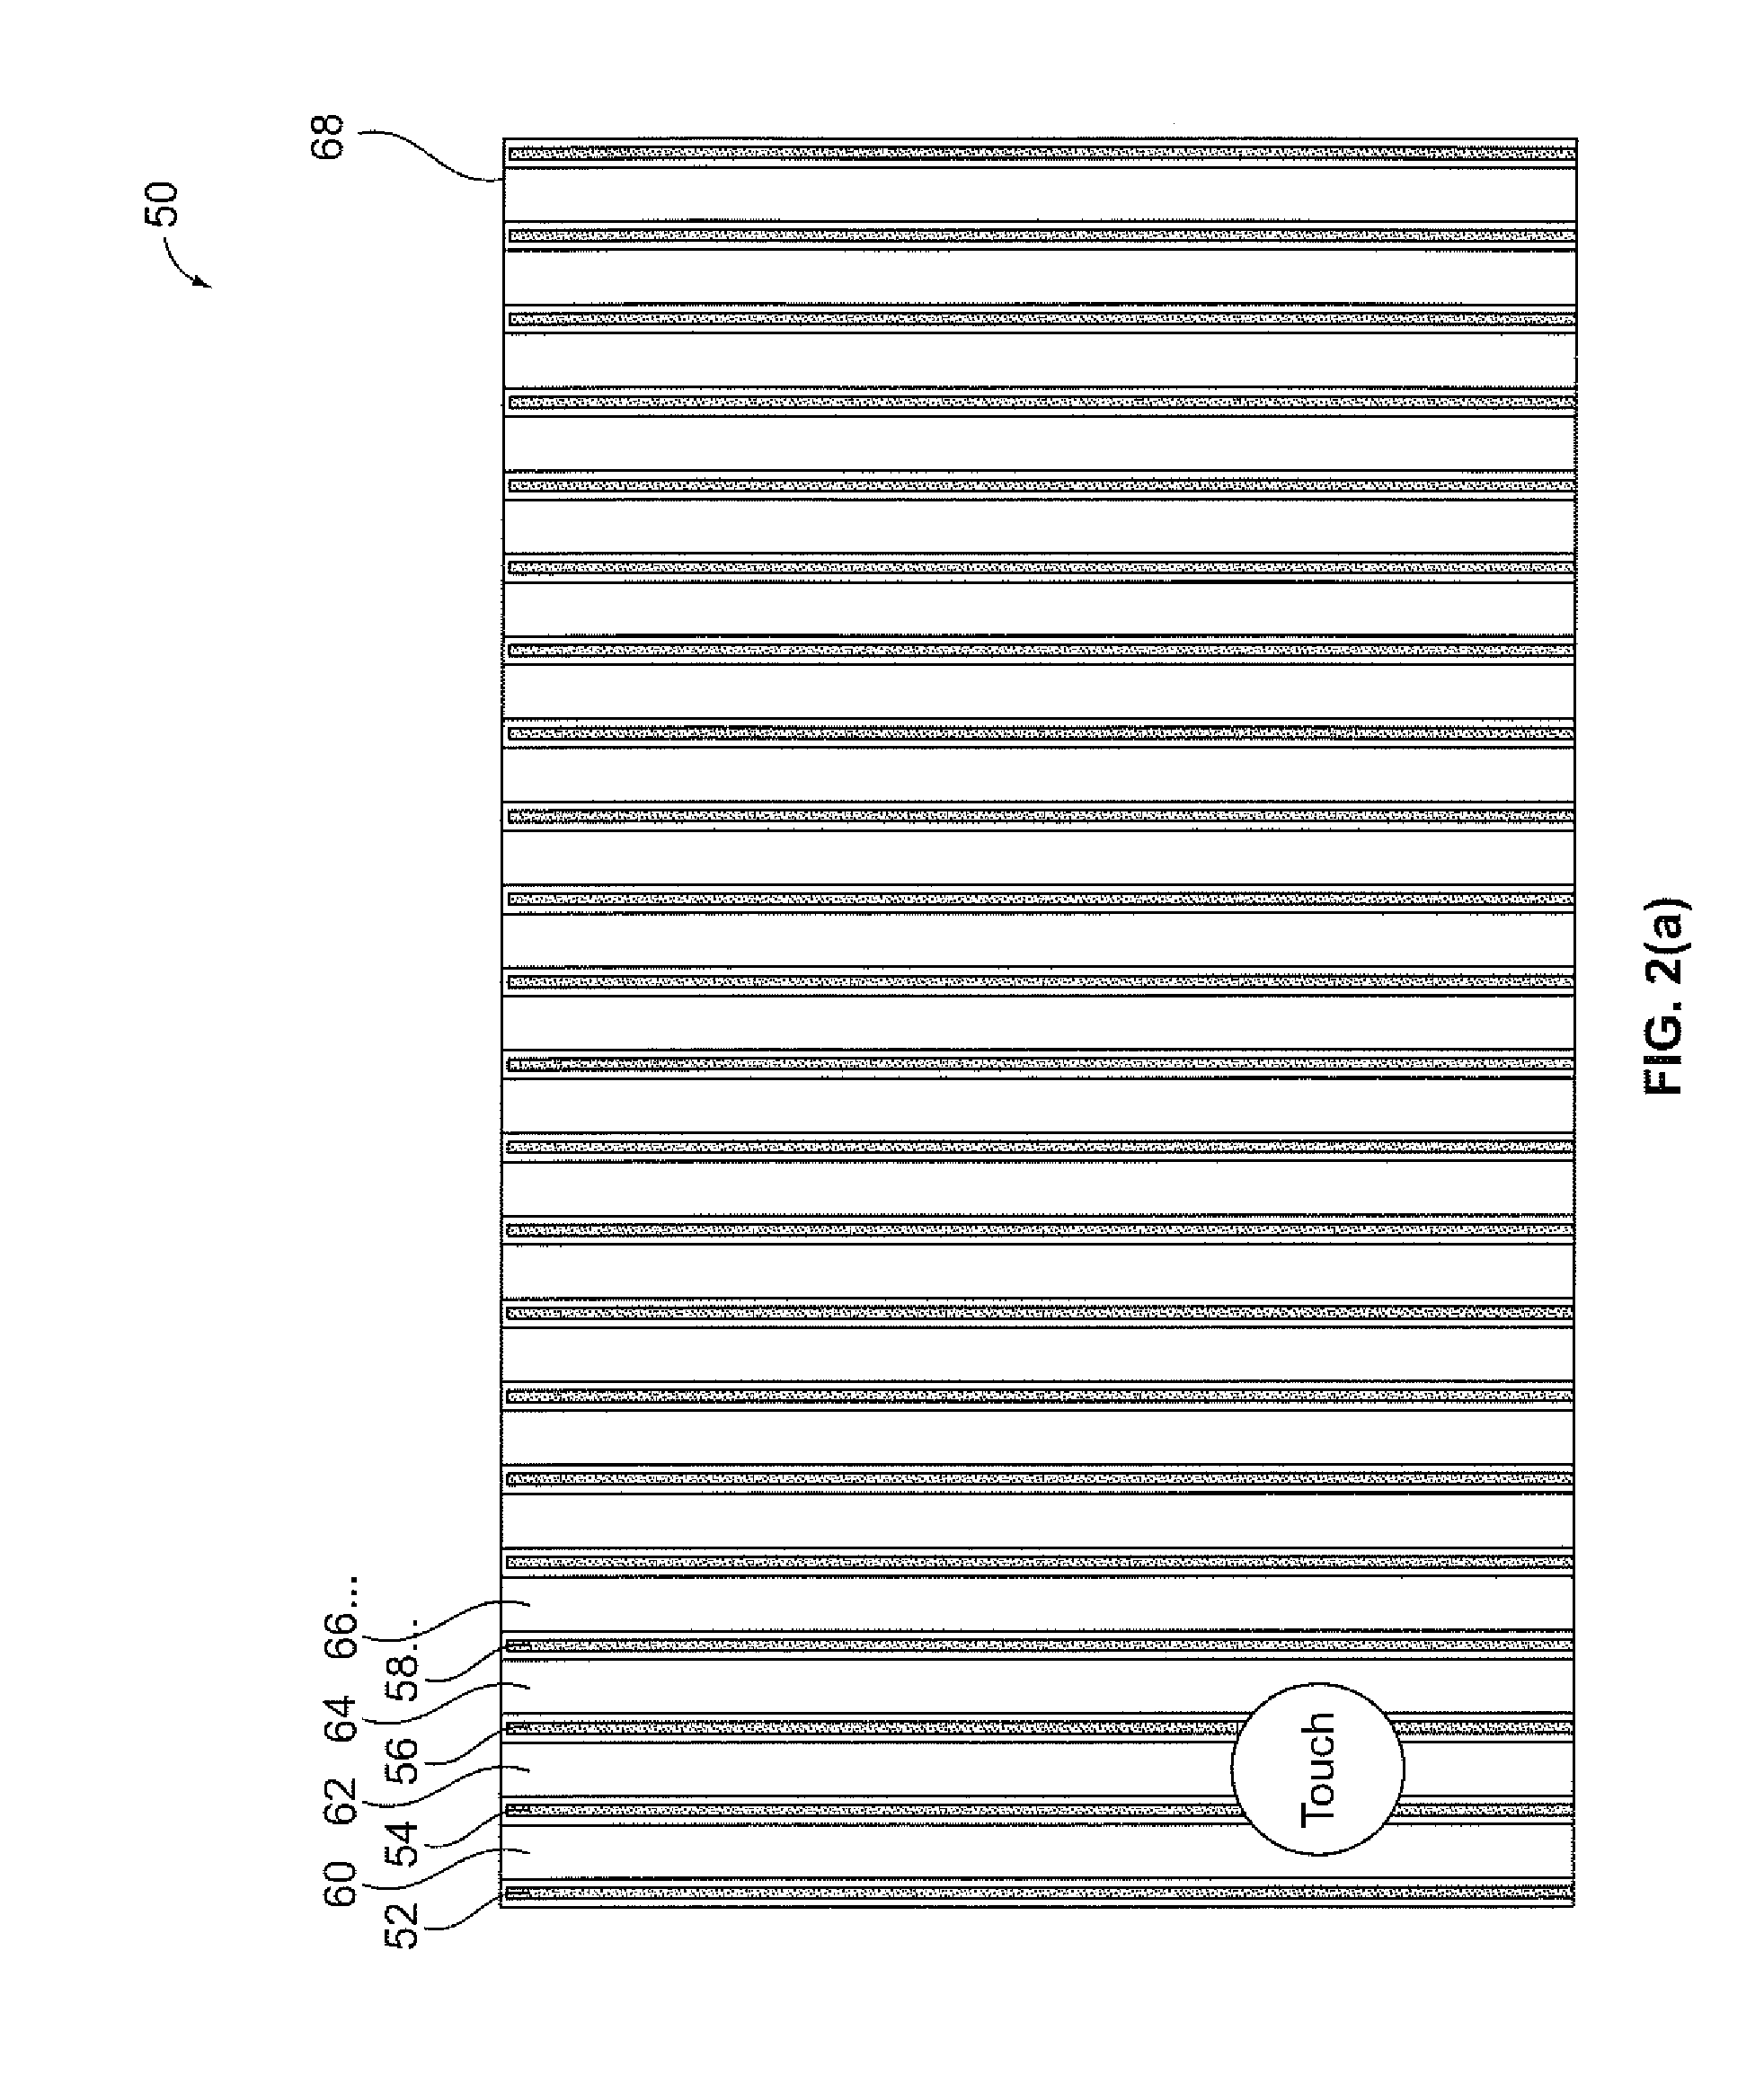 System and Method for Detecting Locations of Touches on a Touch Sensor